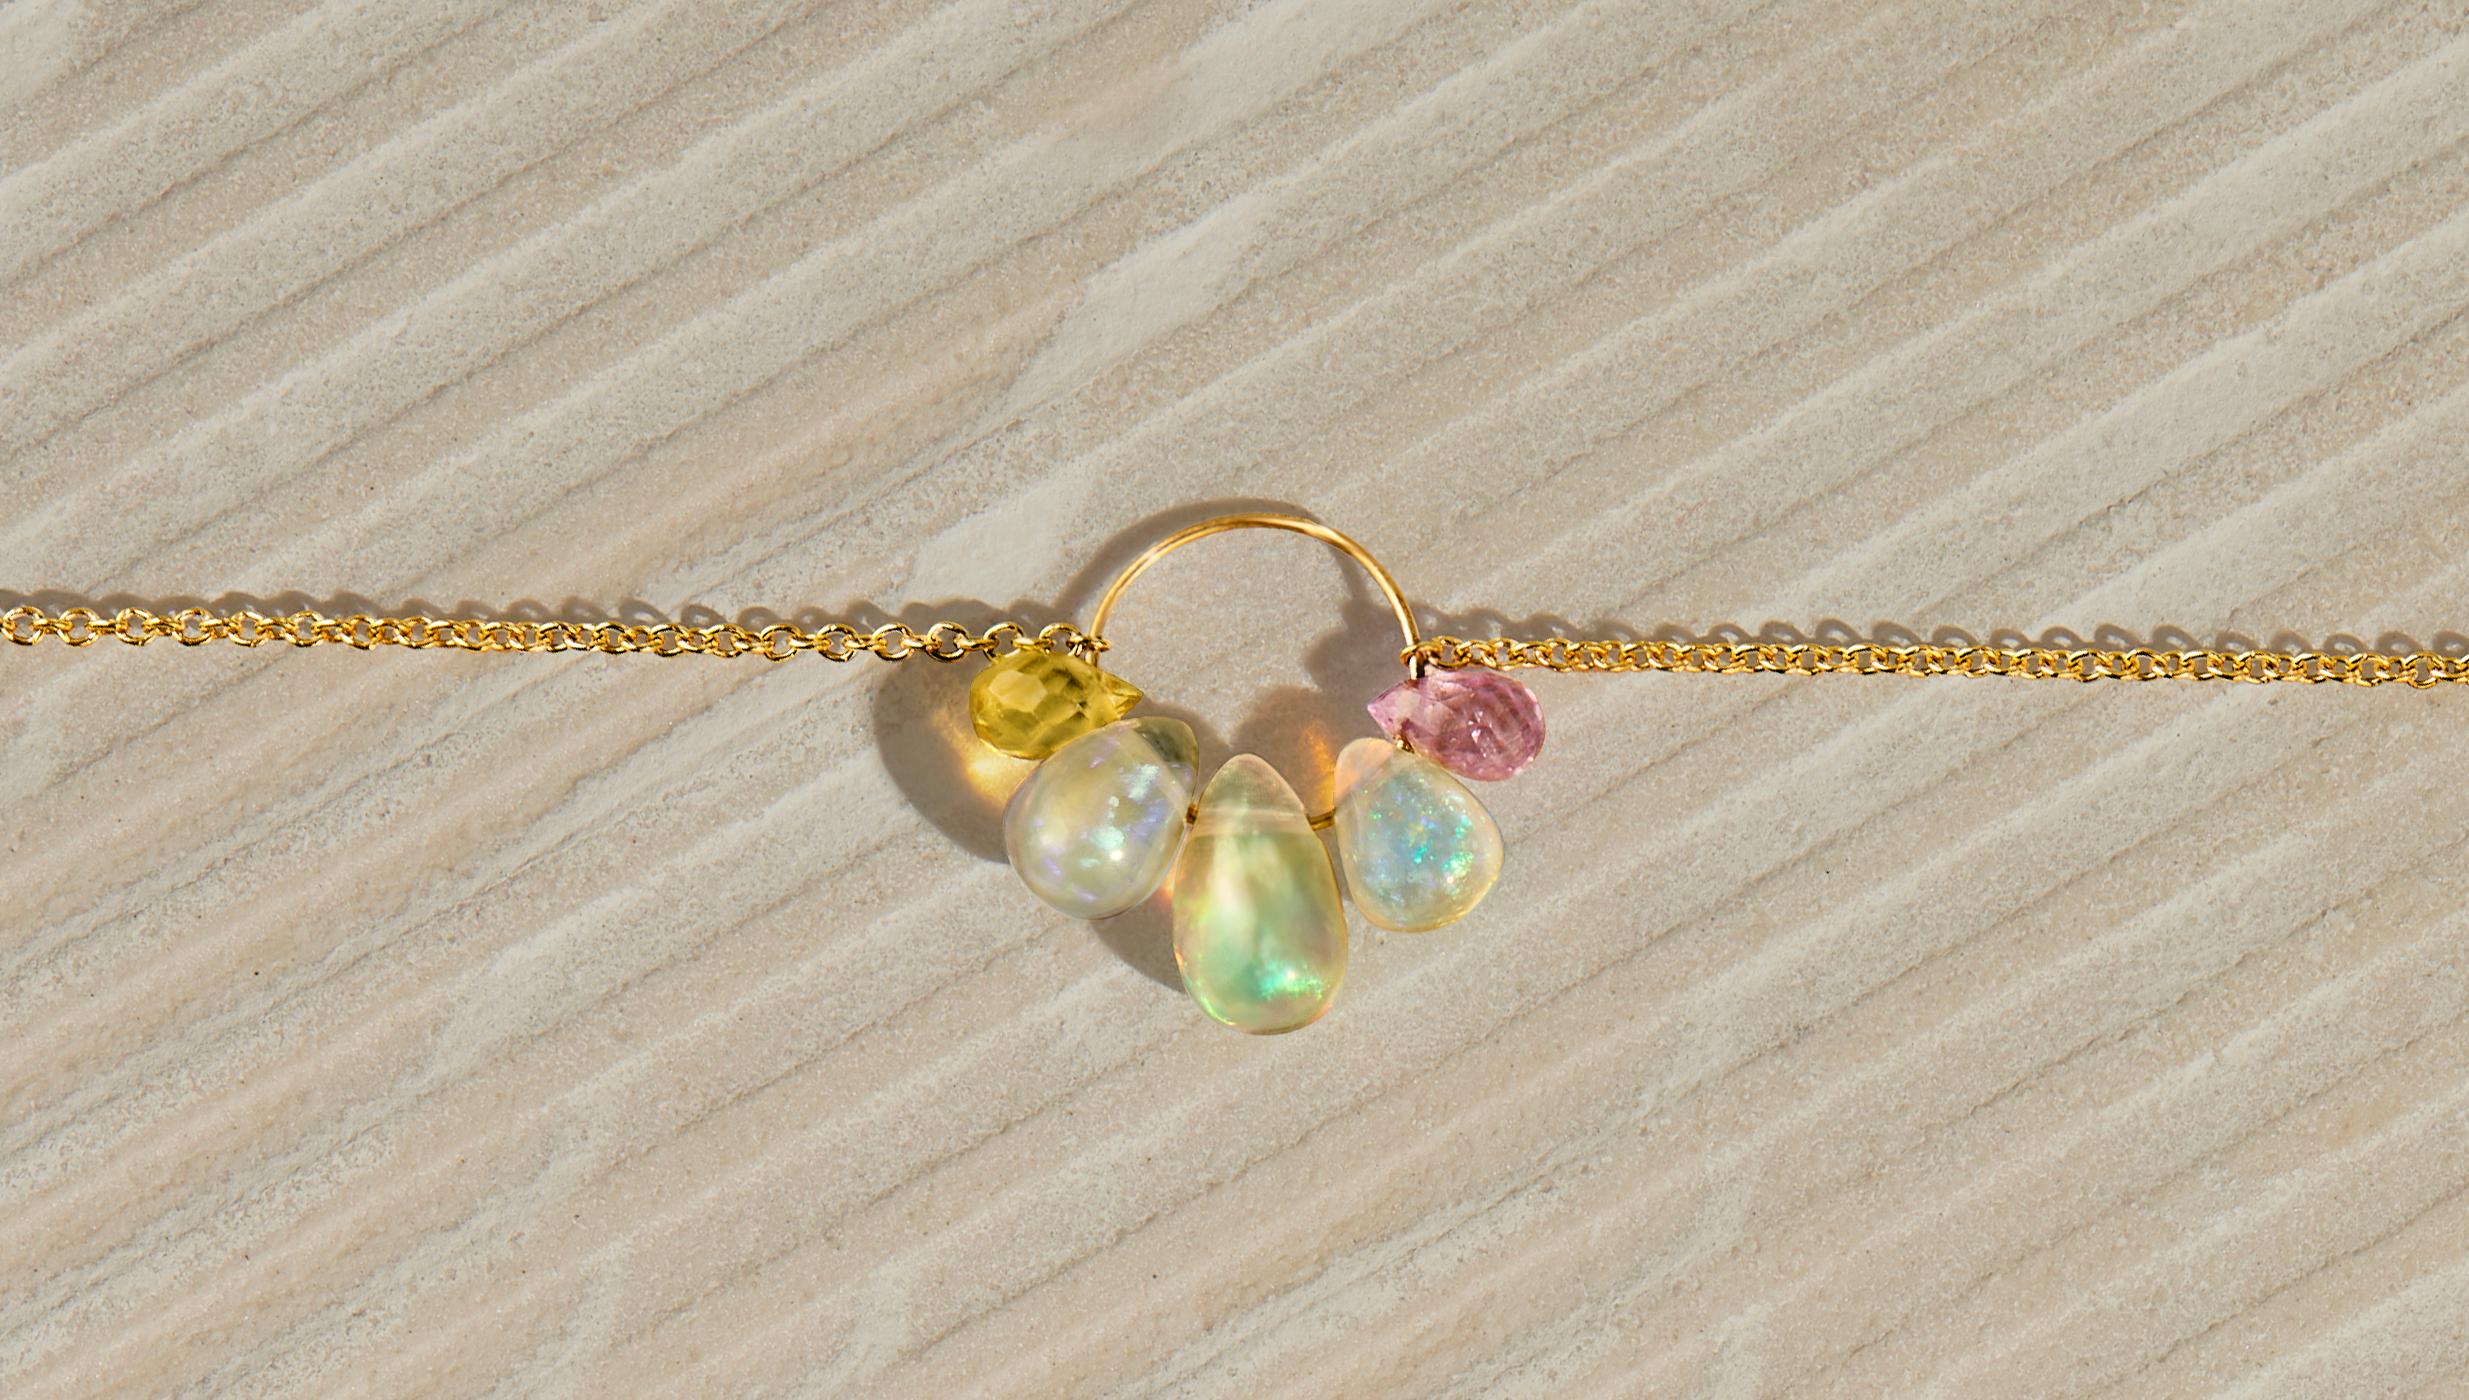 This delicate chain necklace in solid 18 karat gold features a central cluster of opal and sapphire briolettes.  Arrayed on a fine hoop are three smooth Ethiopian opal briolettes of graduated size along with one faceted yellow sapphire briolette and